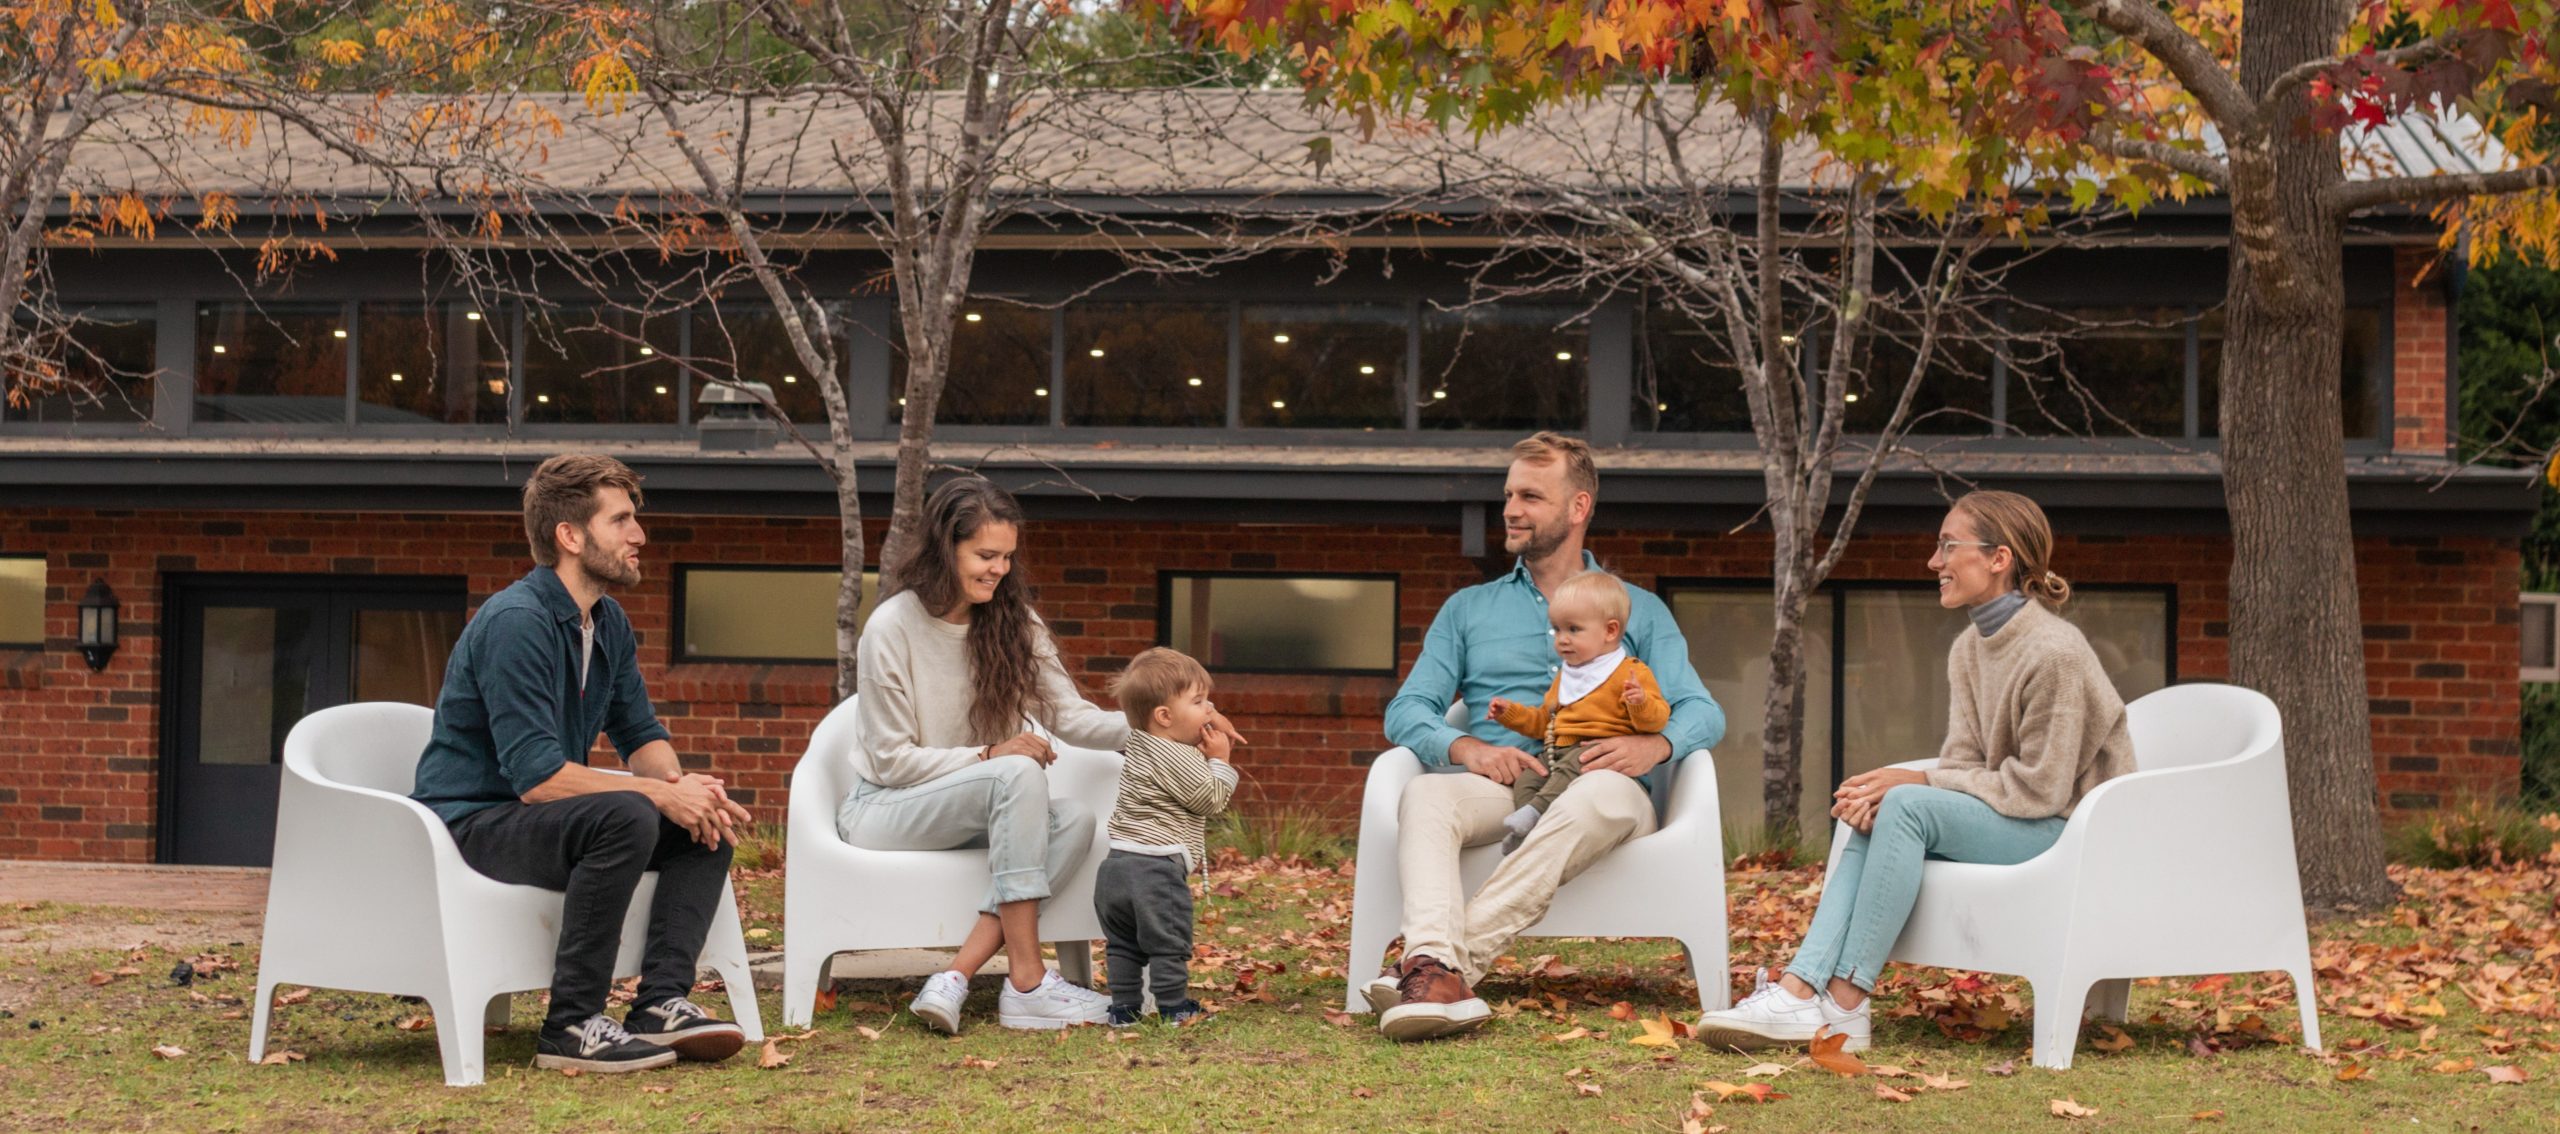 Two couples at a group accommodation venue sit with their toddlers in an outdoor communal space.